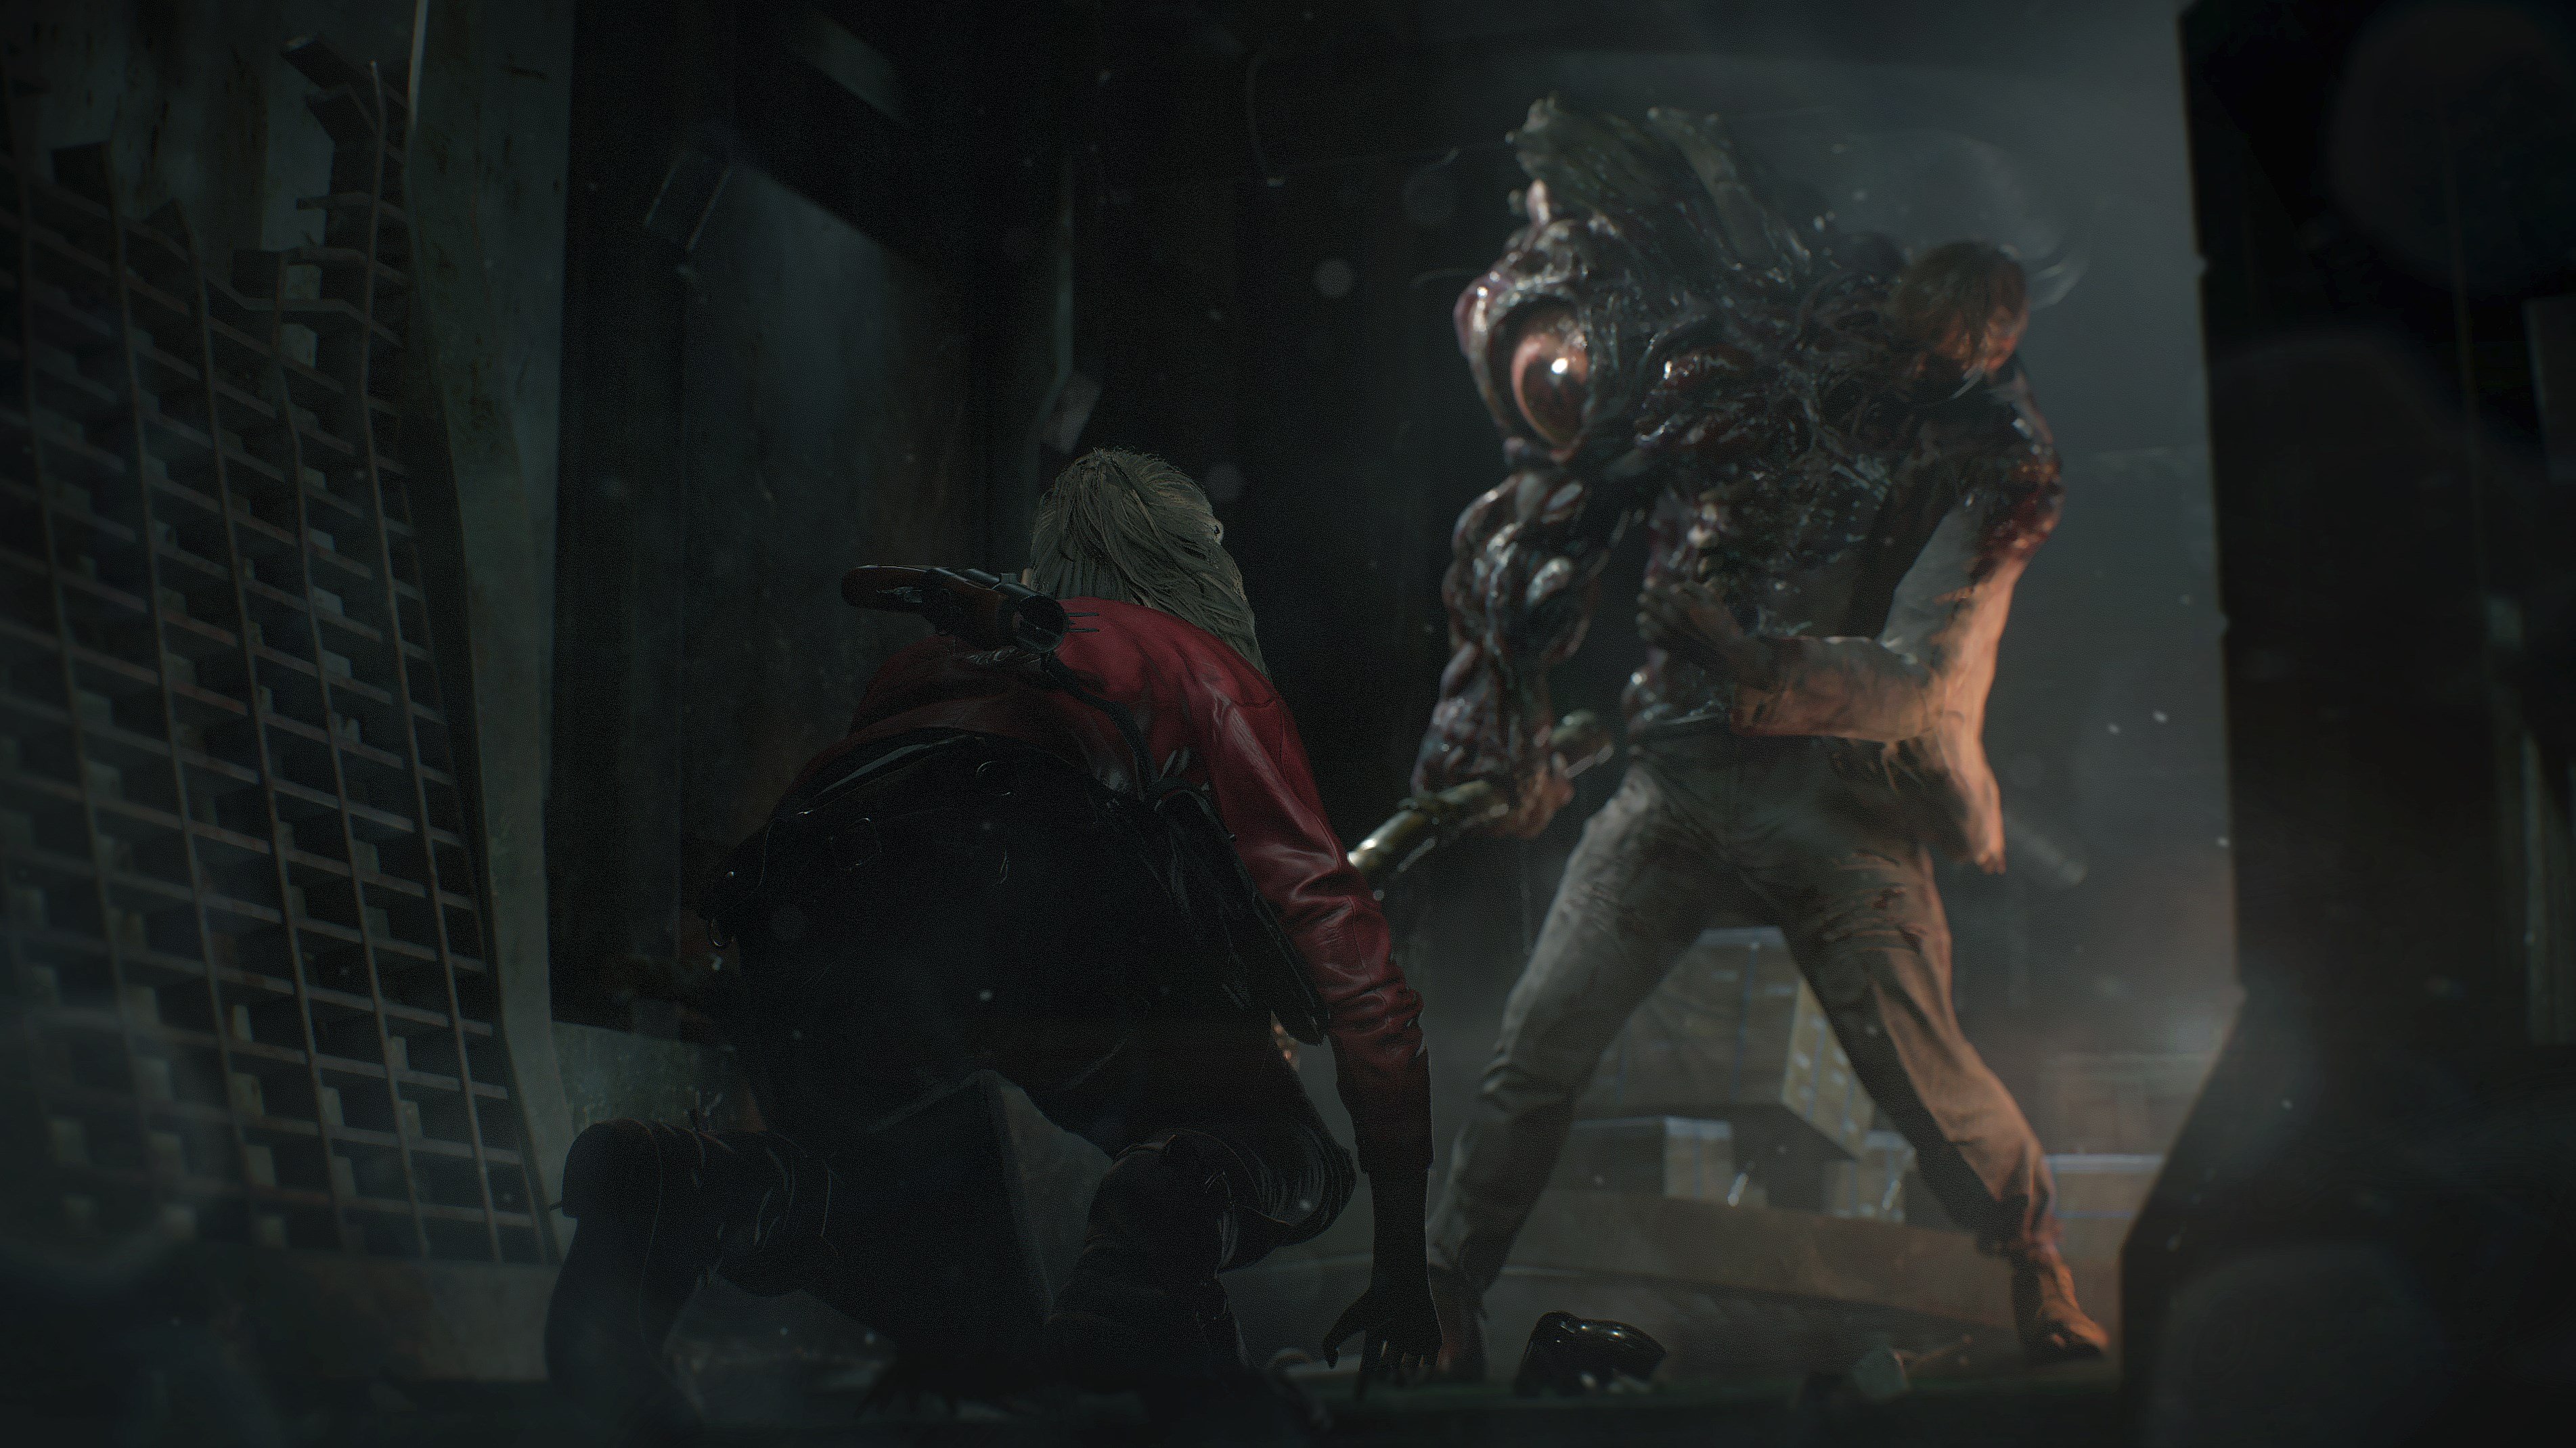 Resident Evil Resident Evil 2 Video Games Leon Kennedy Racoon City Claire Redfield Capcom 3806x2140